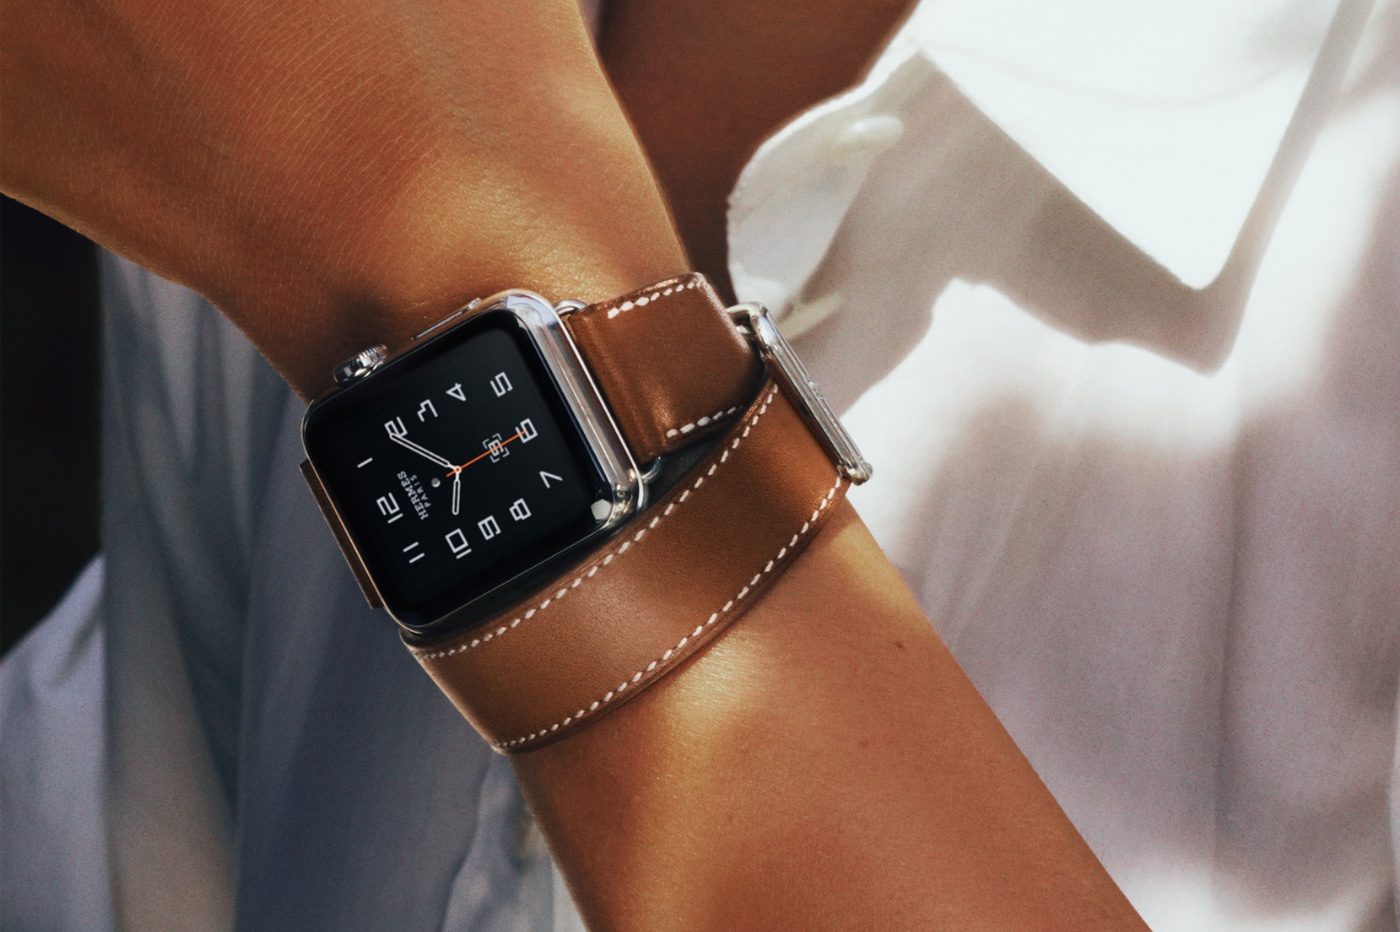 She loses her Apple Watch and $40,000 is stolen